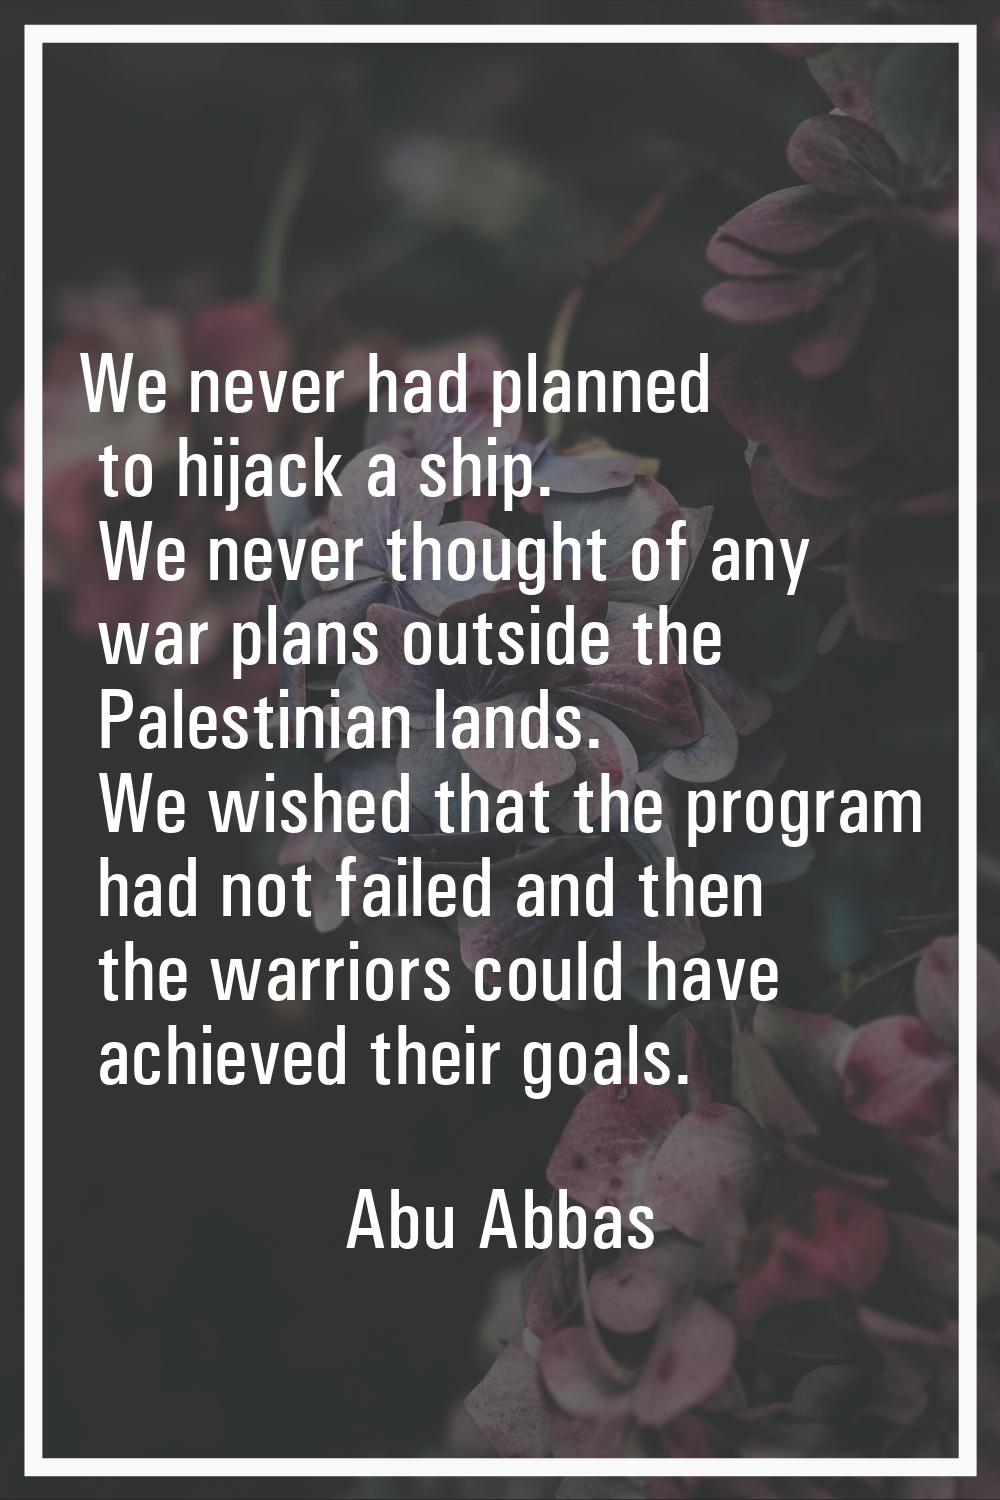 We never had planned to hijack a ship. We never thought of any war plans outside the Palestinian la